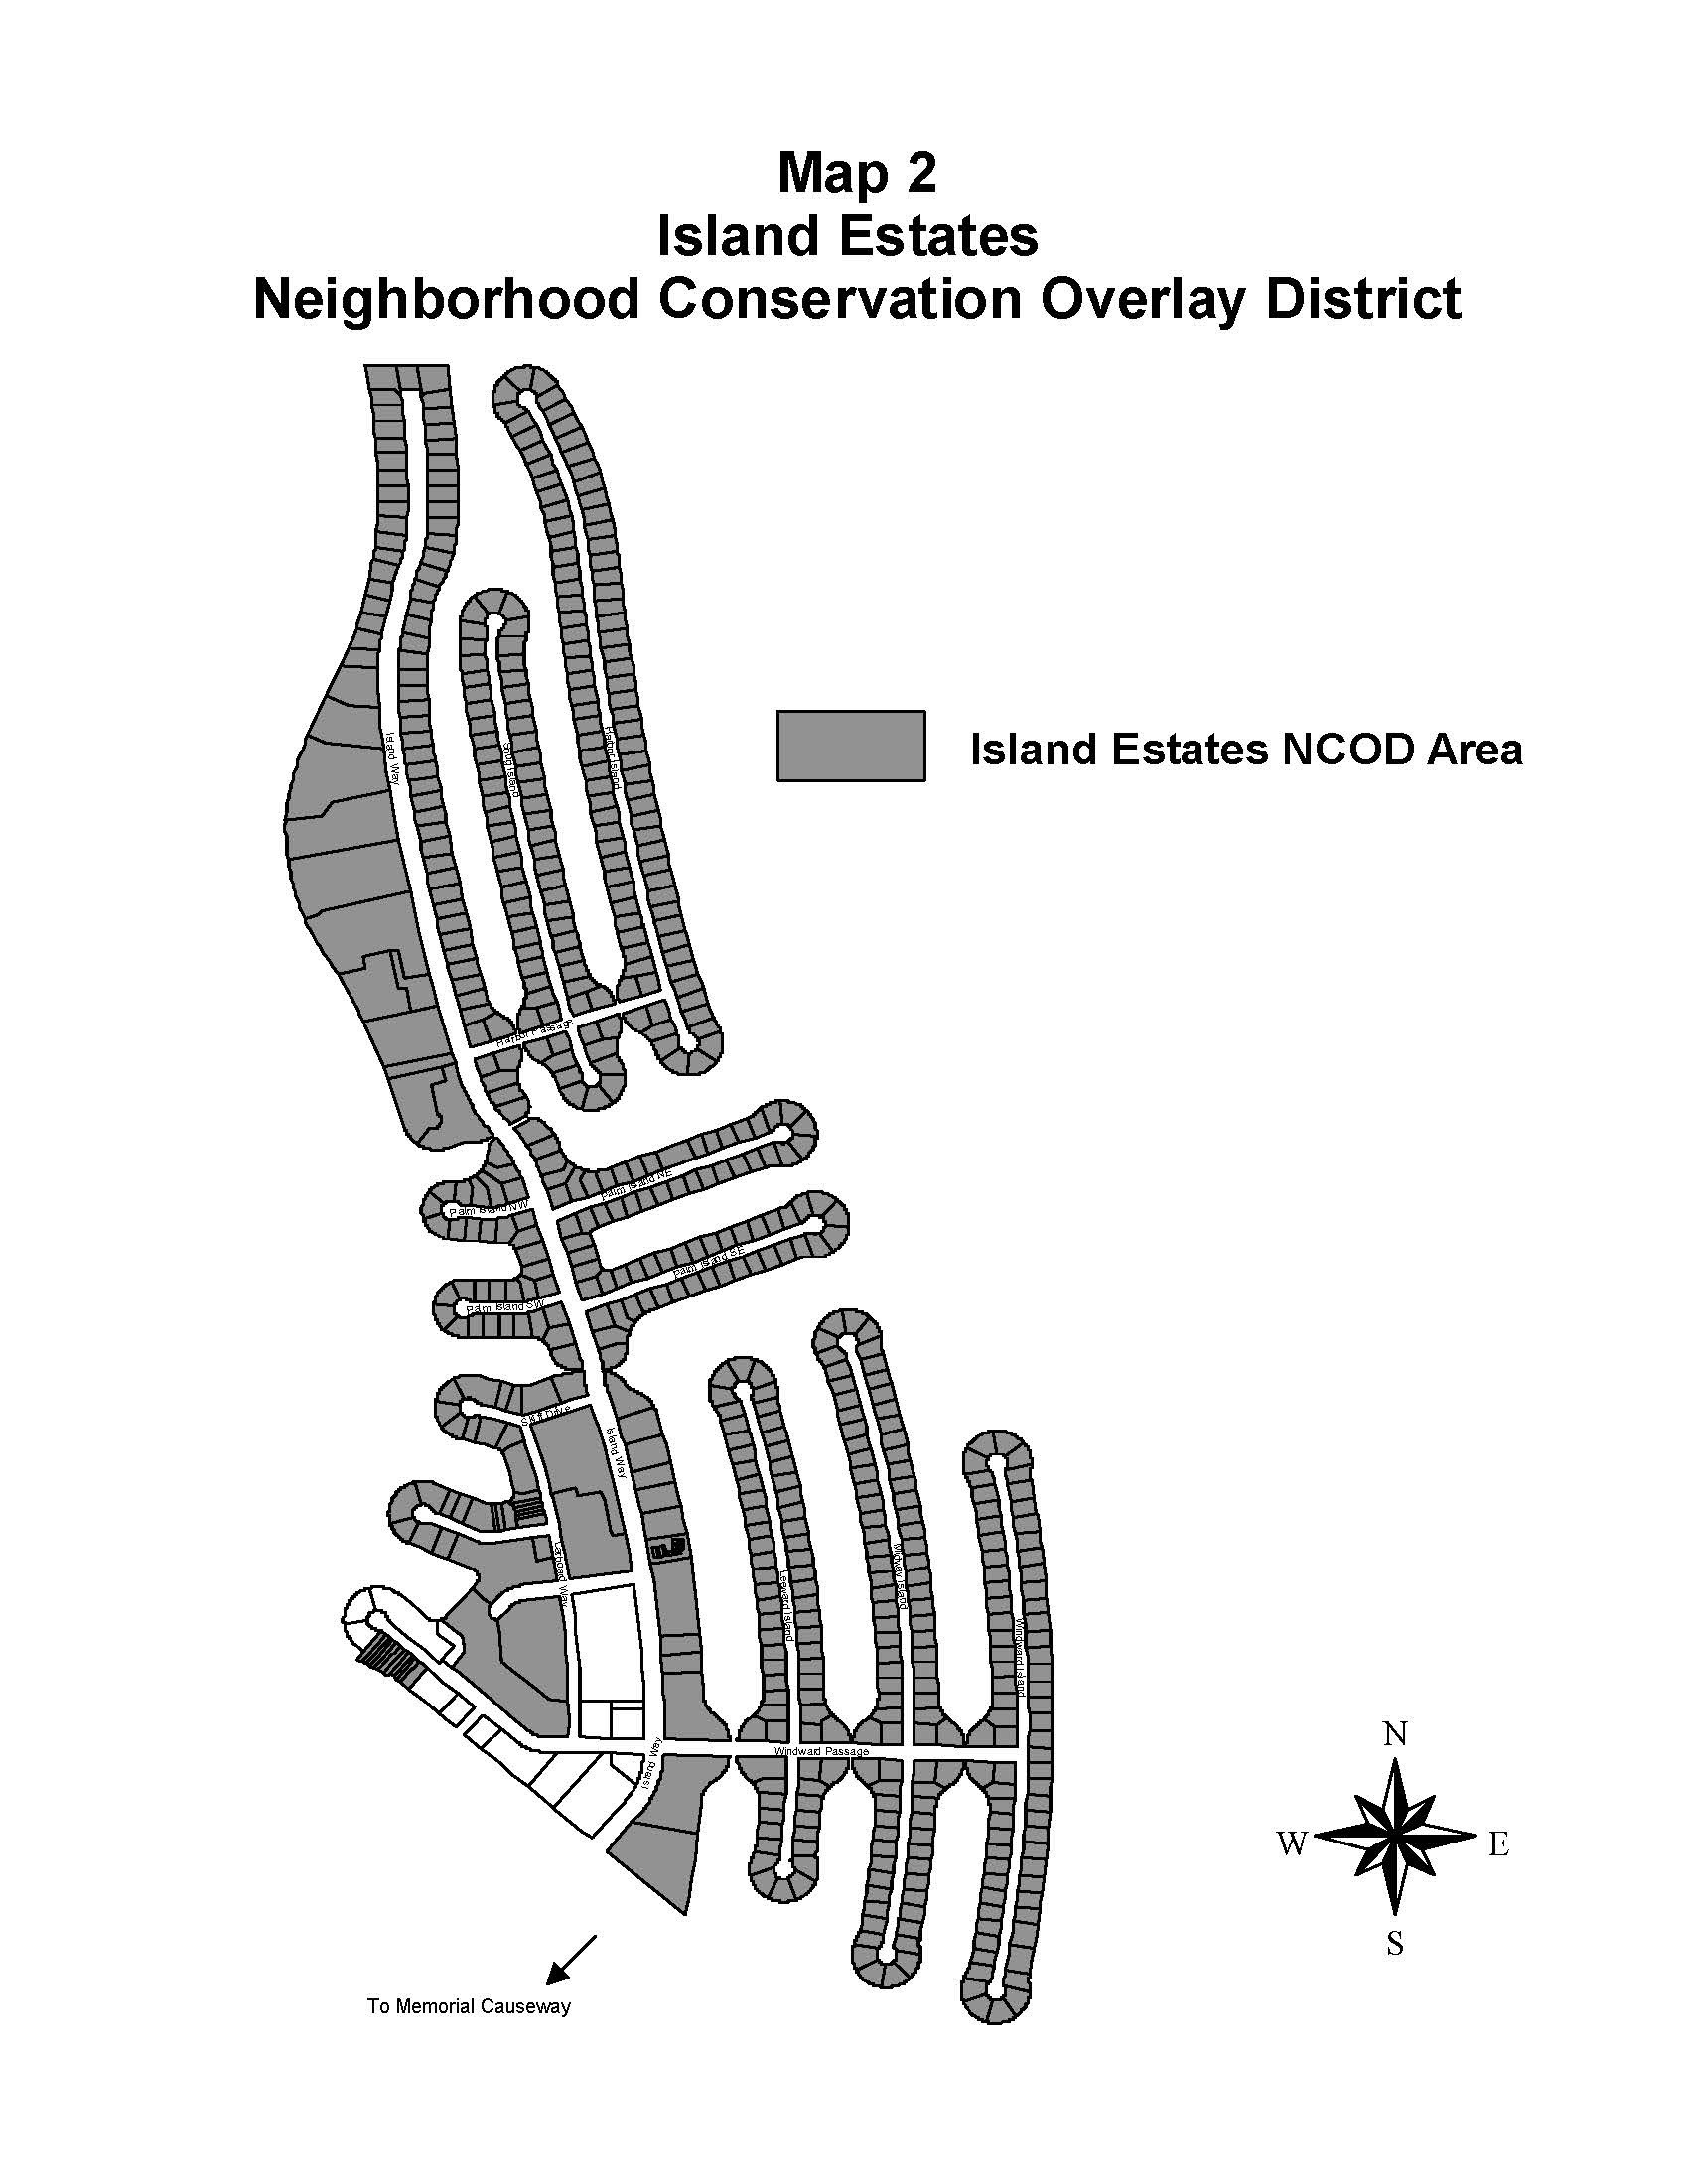 Map showing the street names and parcels which make up the Island Estates Neighborhood Conservation Overlay District. Please contact the Planning and Development department at 727-562-4567 if you would like a detailed description of the map.